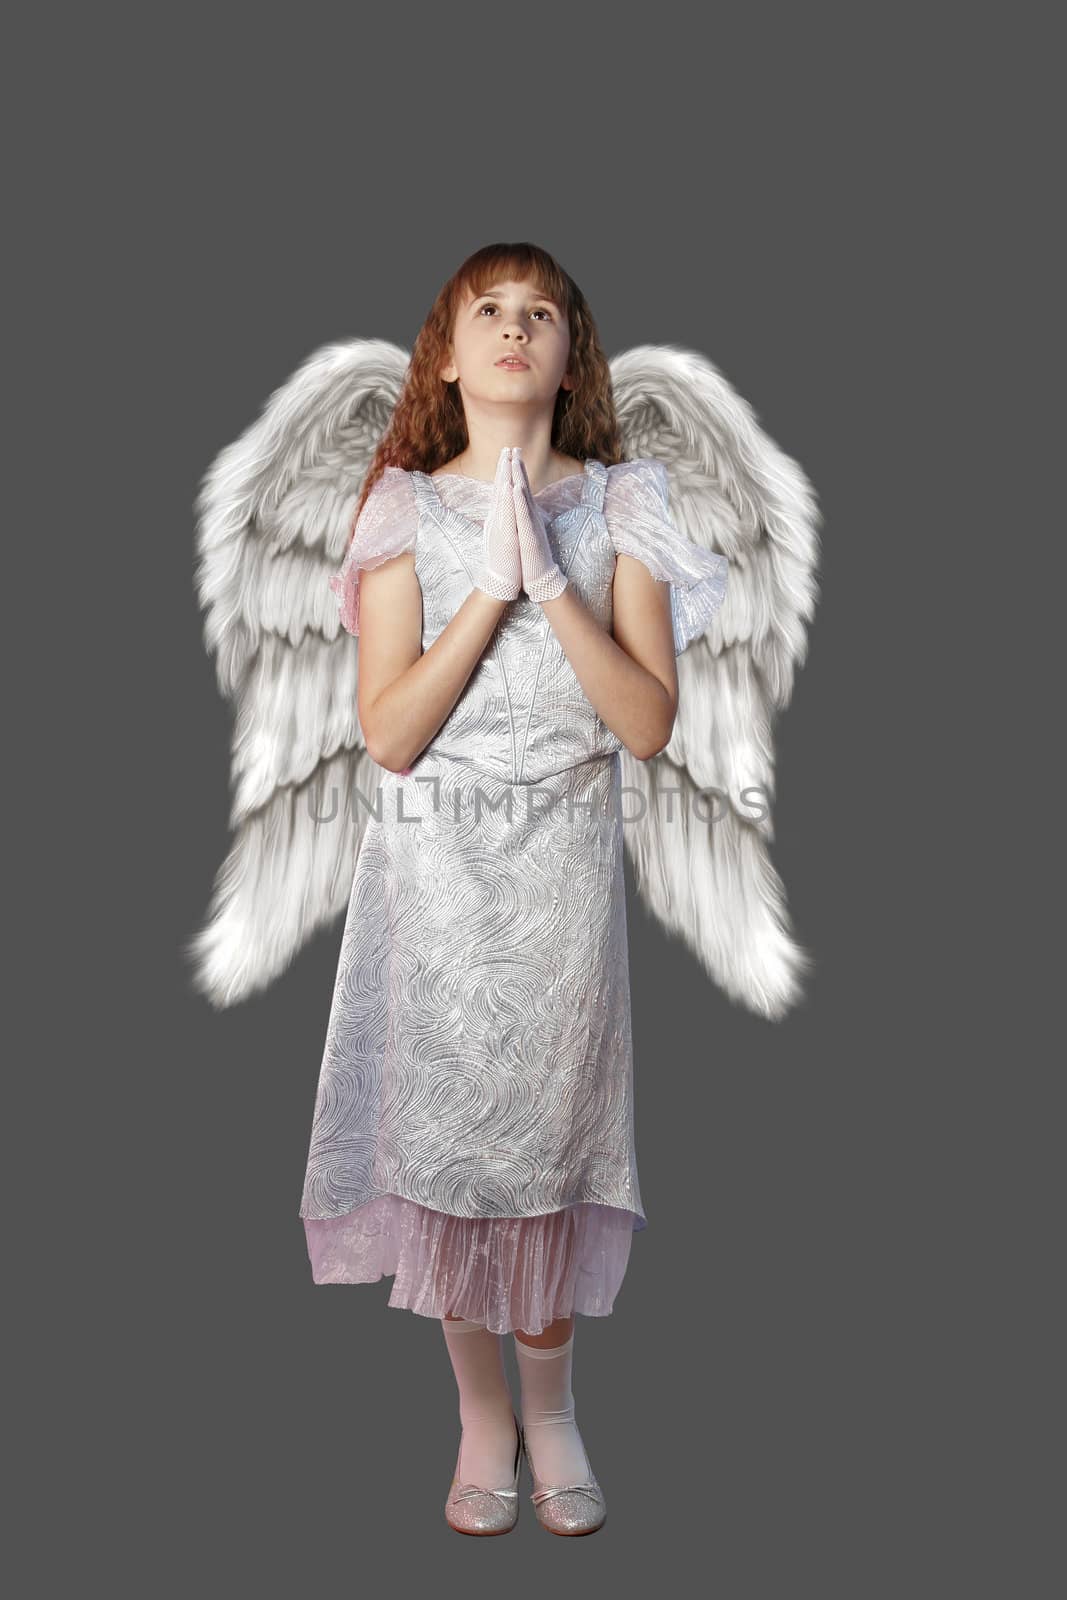 Girl with angel wings on gray background.